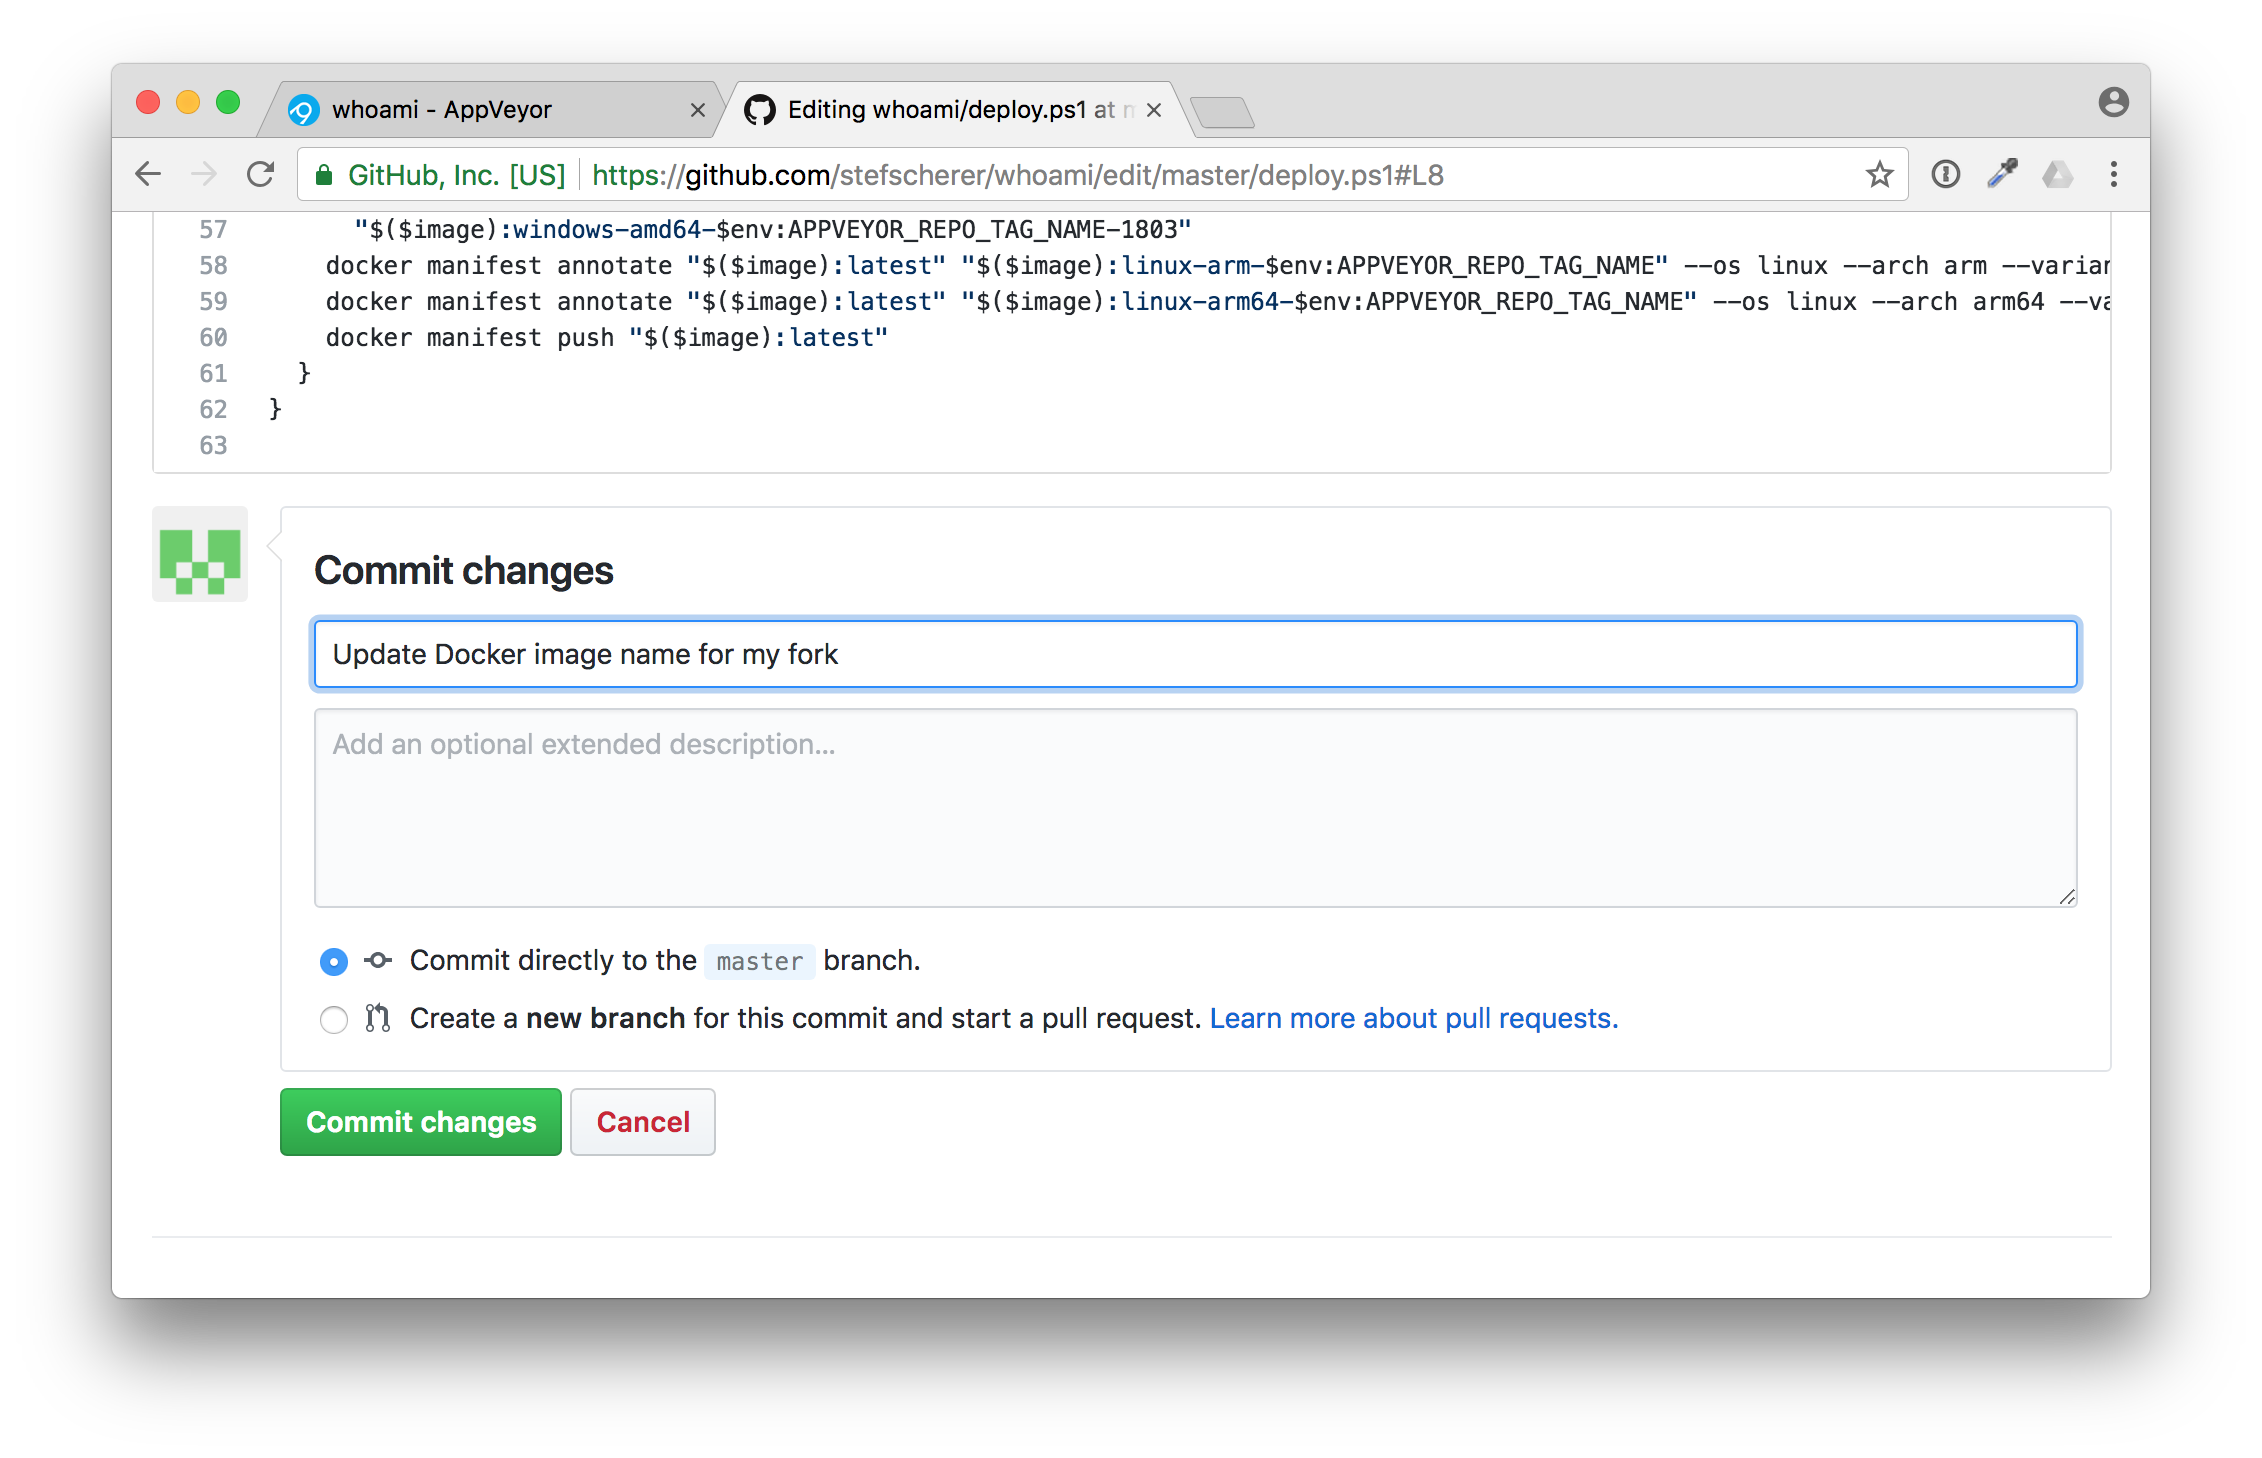 github-commit-changes-deploy-ps1